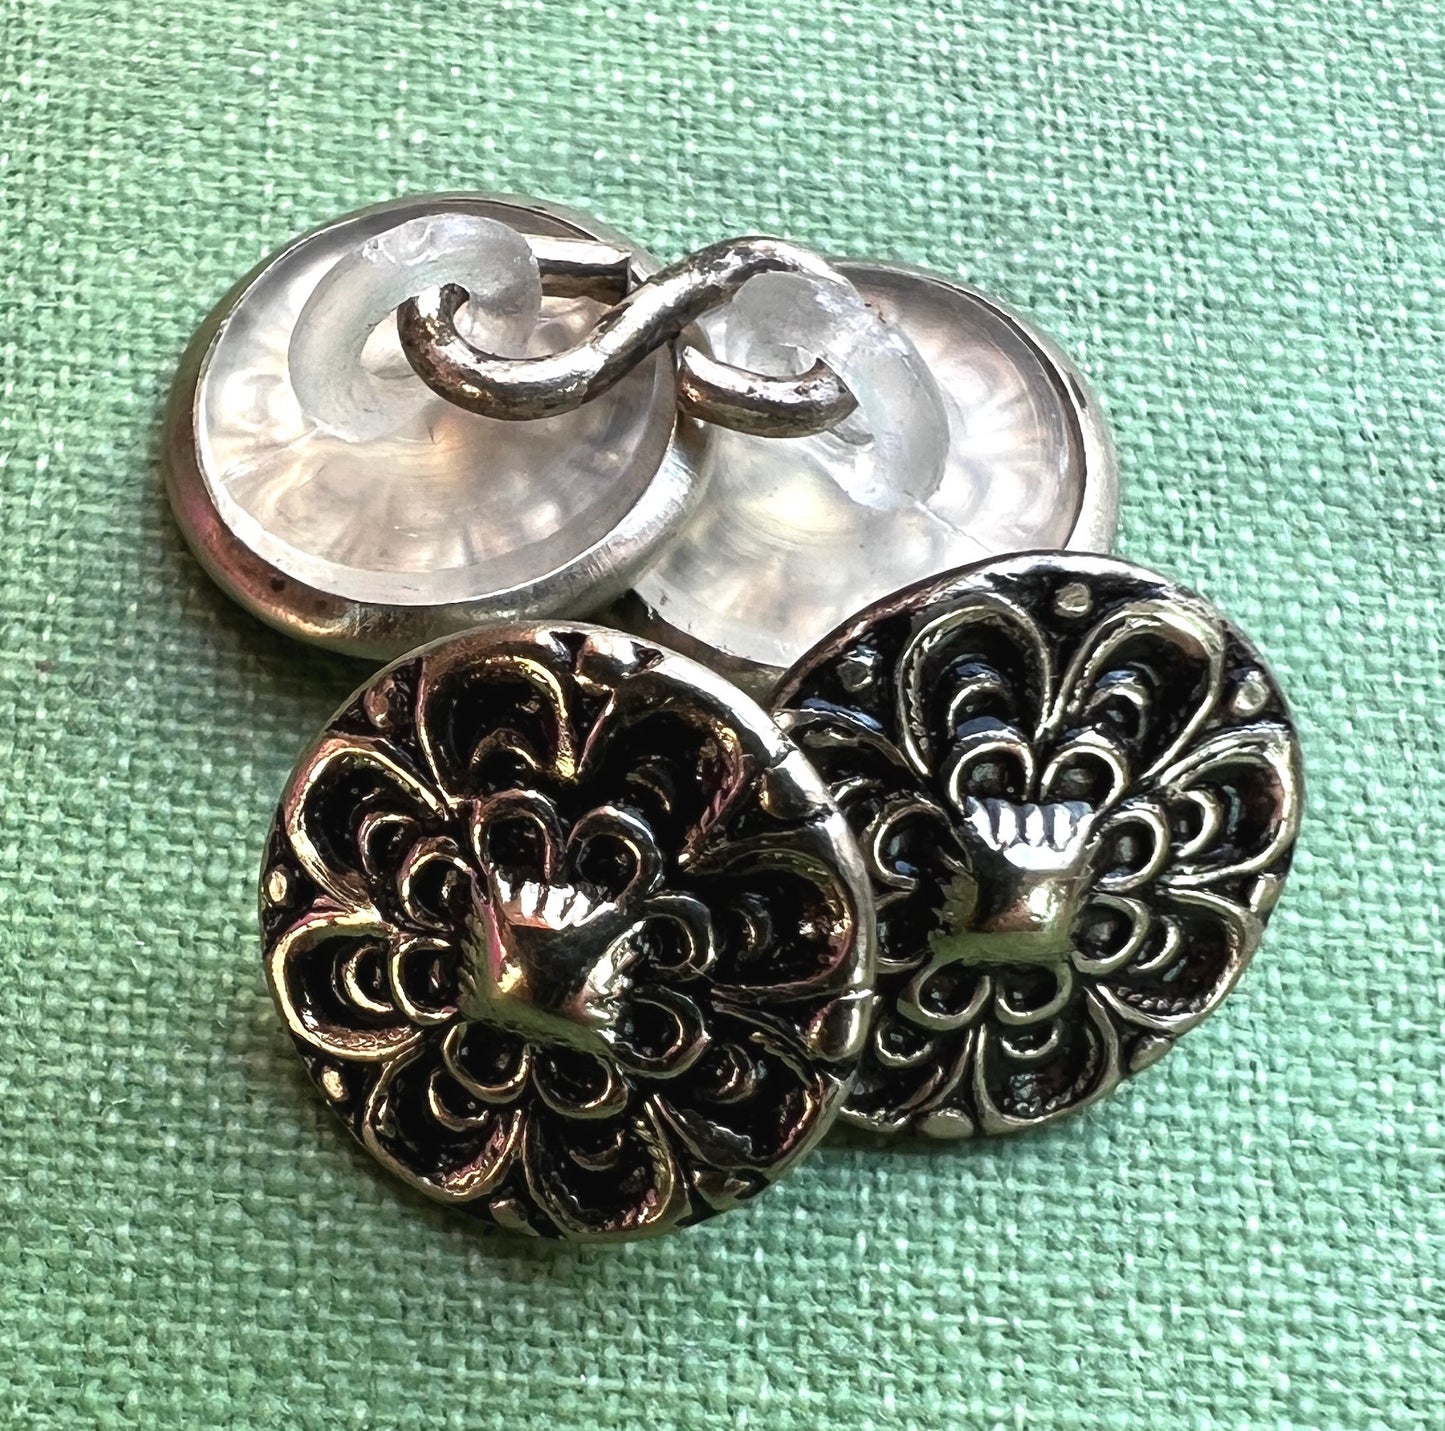 Pair of 12mm Decorative Metal Vintage Buttons